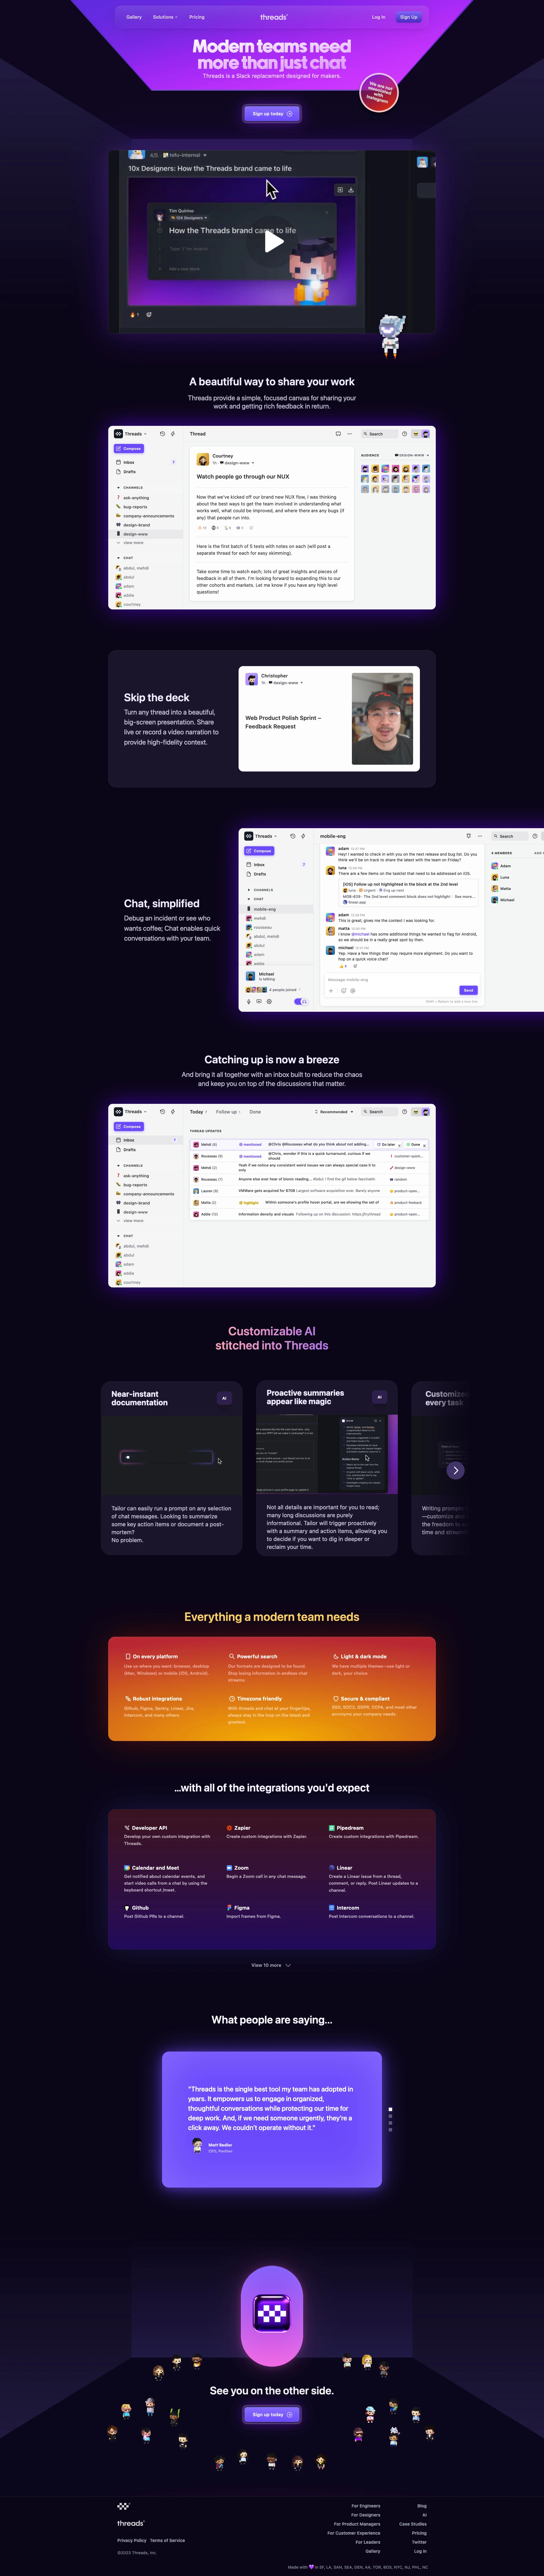 Threads Landing Page Example: We've built an all-in-one communication platform designed for makers. With Threads, avoid constant interruptions, the pain of keeping up / catching up, and encourage motion over progress as your company scales.